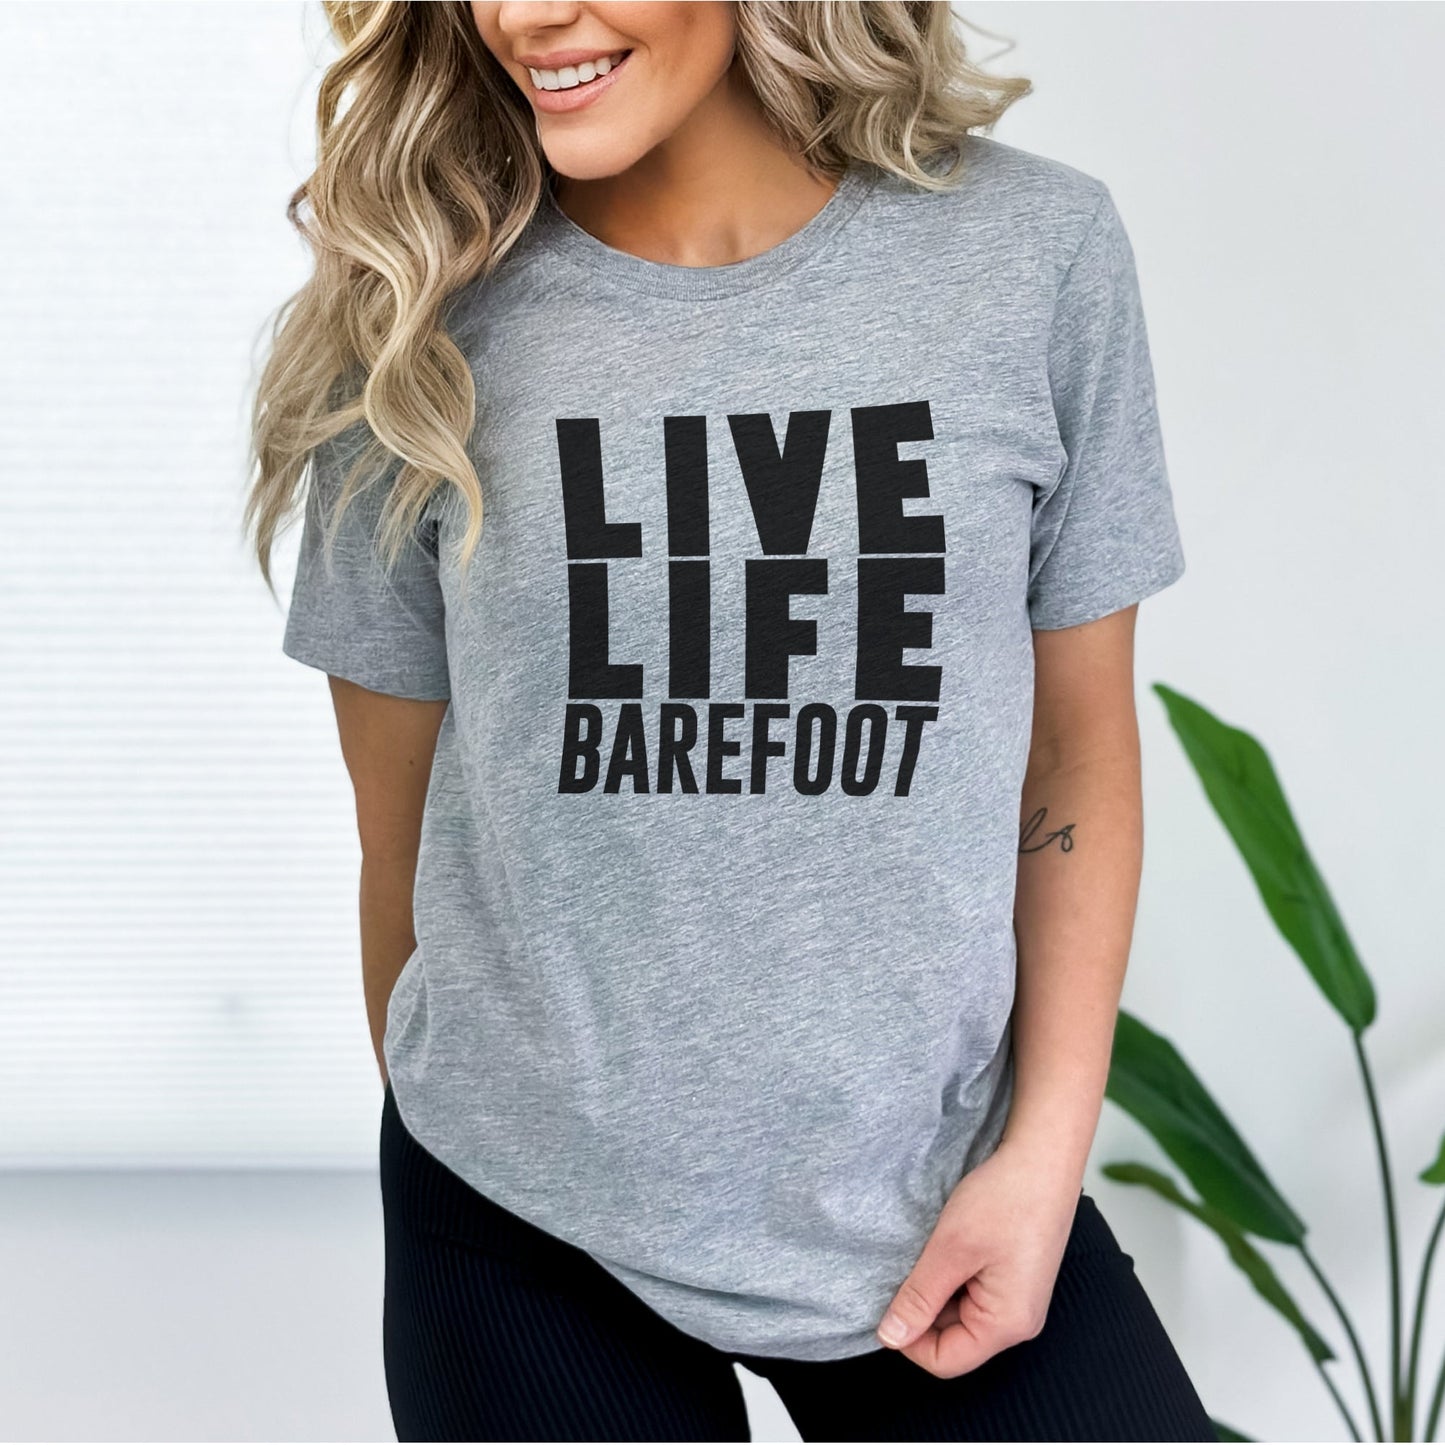 ADULT SIZE "Live Life Barefoot" Grey T-shirt